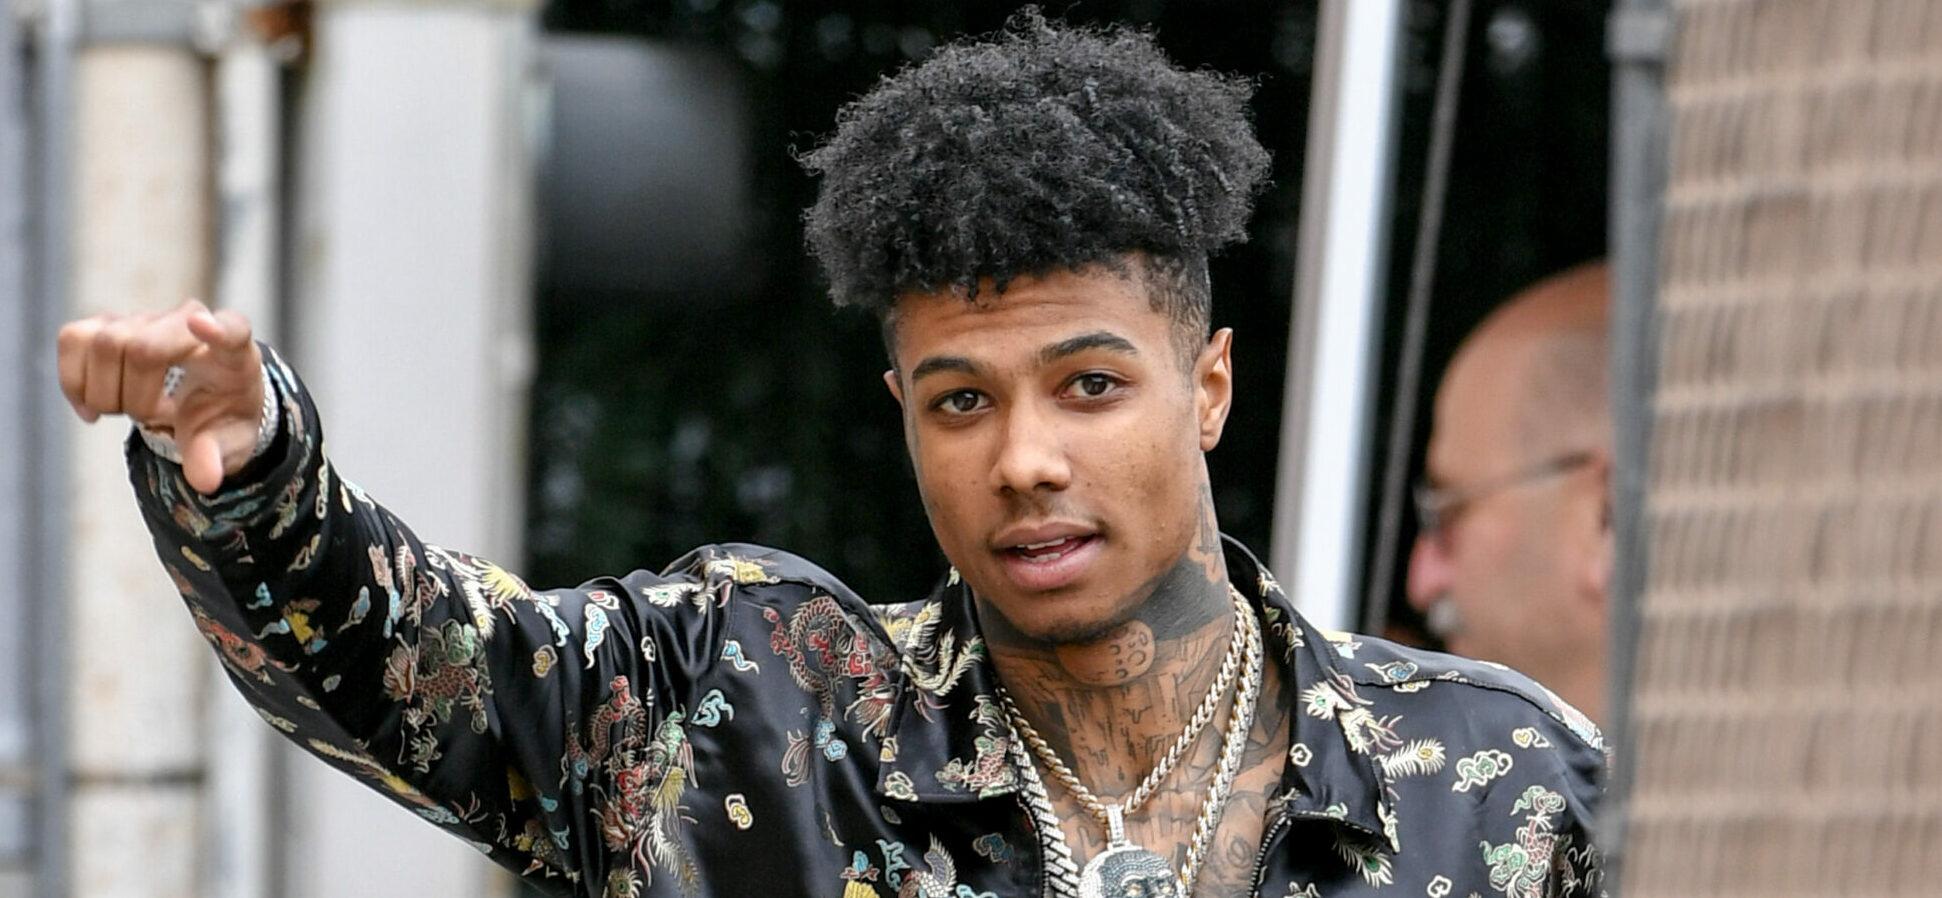 Soulja Boy’s GF Sues Blueface For Defamation After Rapper Claimed They Hooked Up